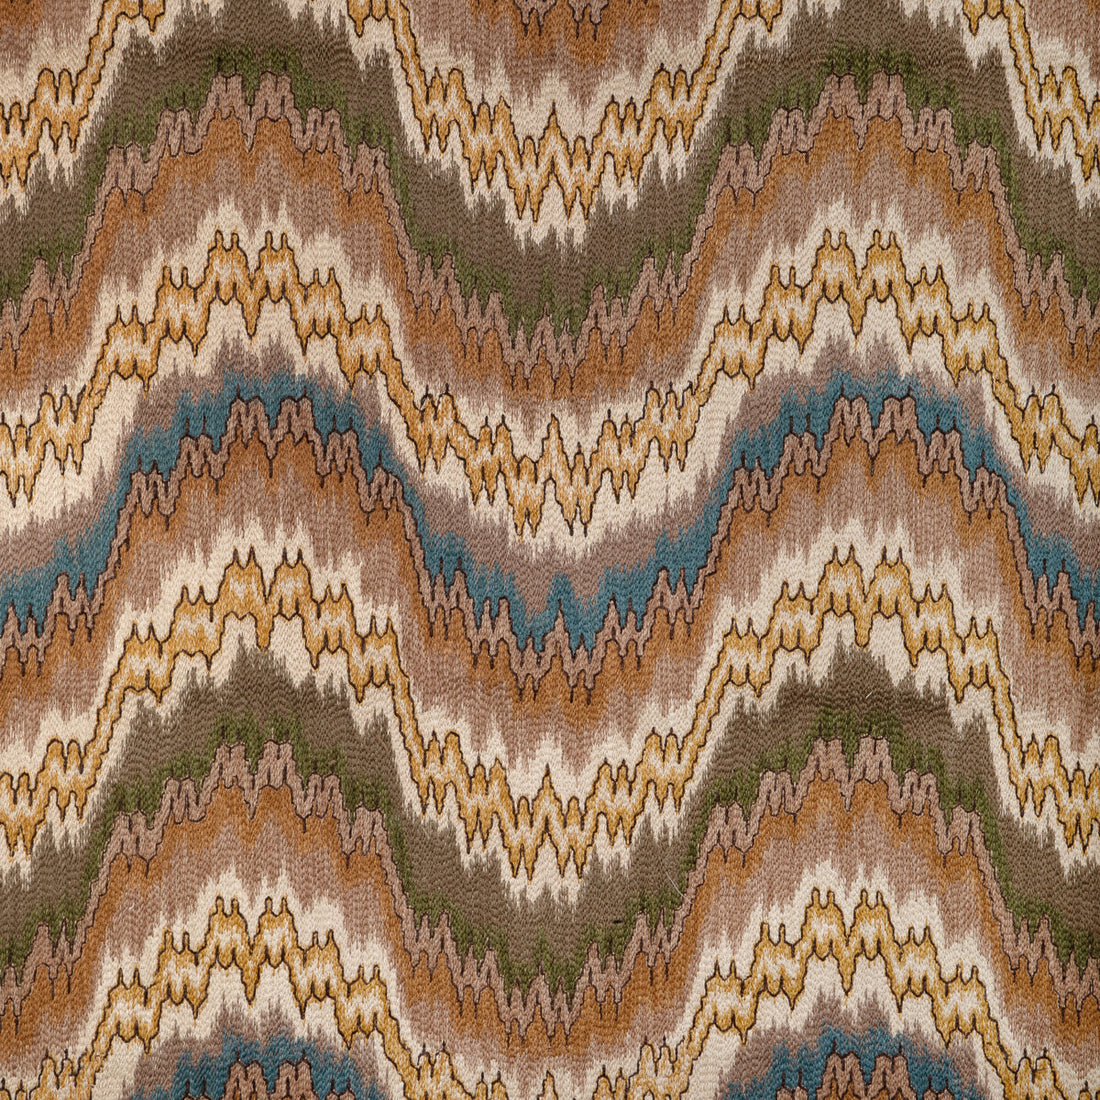 Flame Embroidery fabric in fawn color - pattern 2023131.1615.0 - by Lee Jofa in the Lee Jofa 200 collection